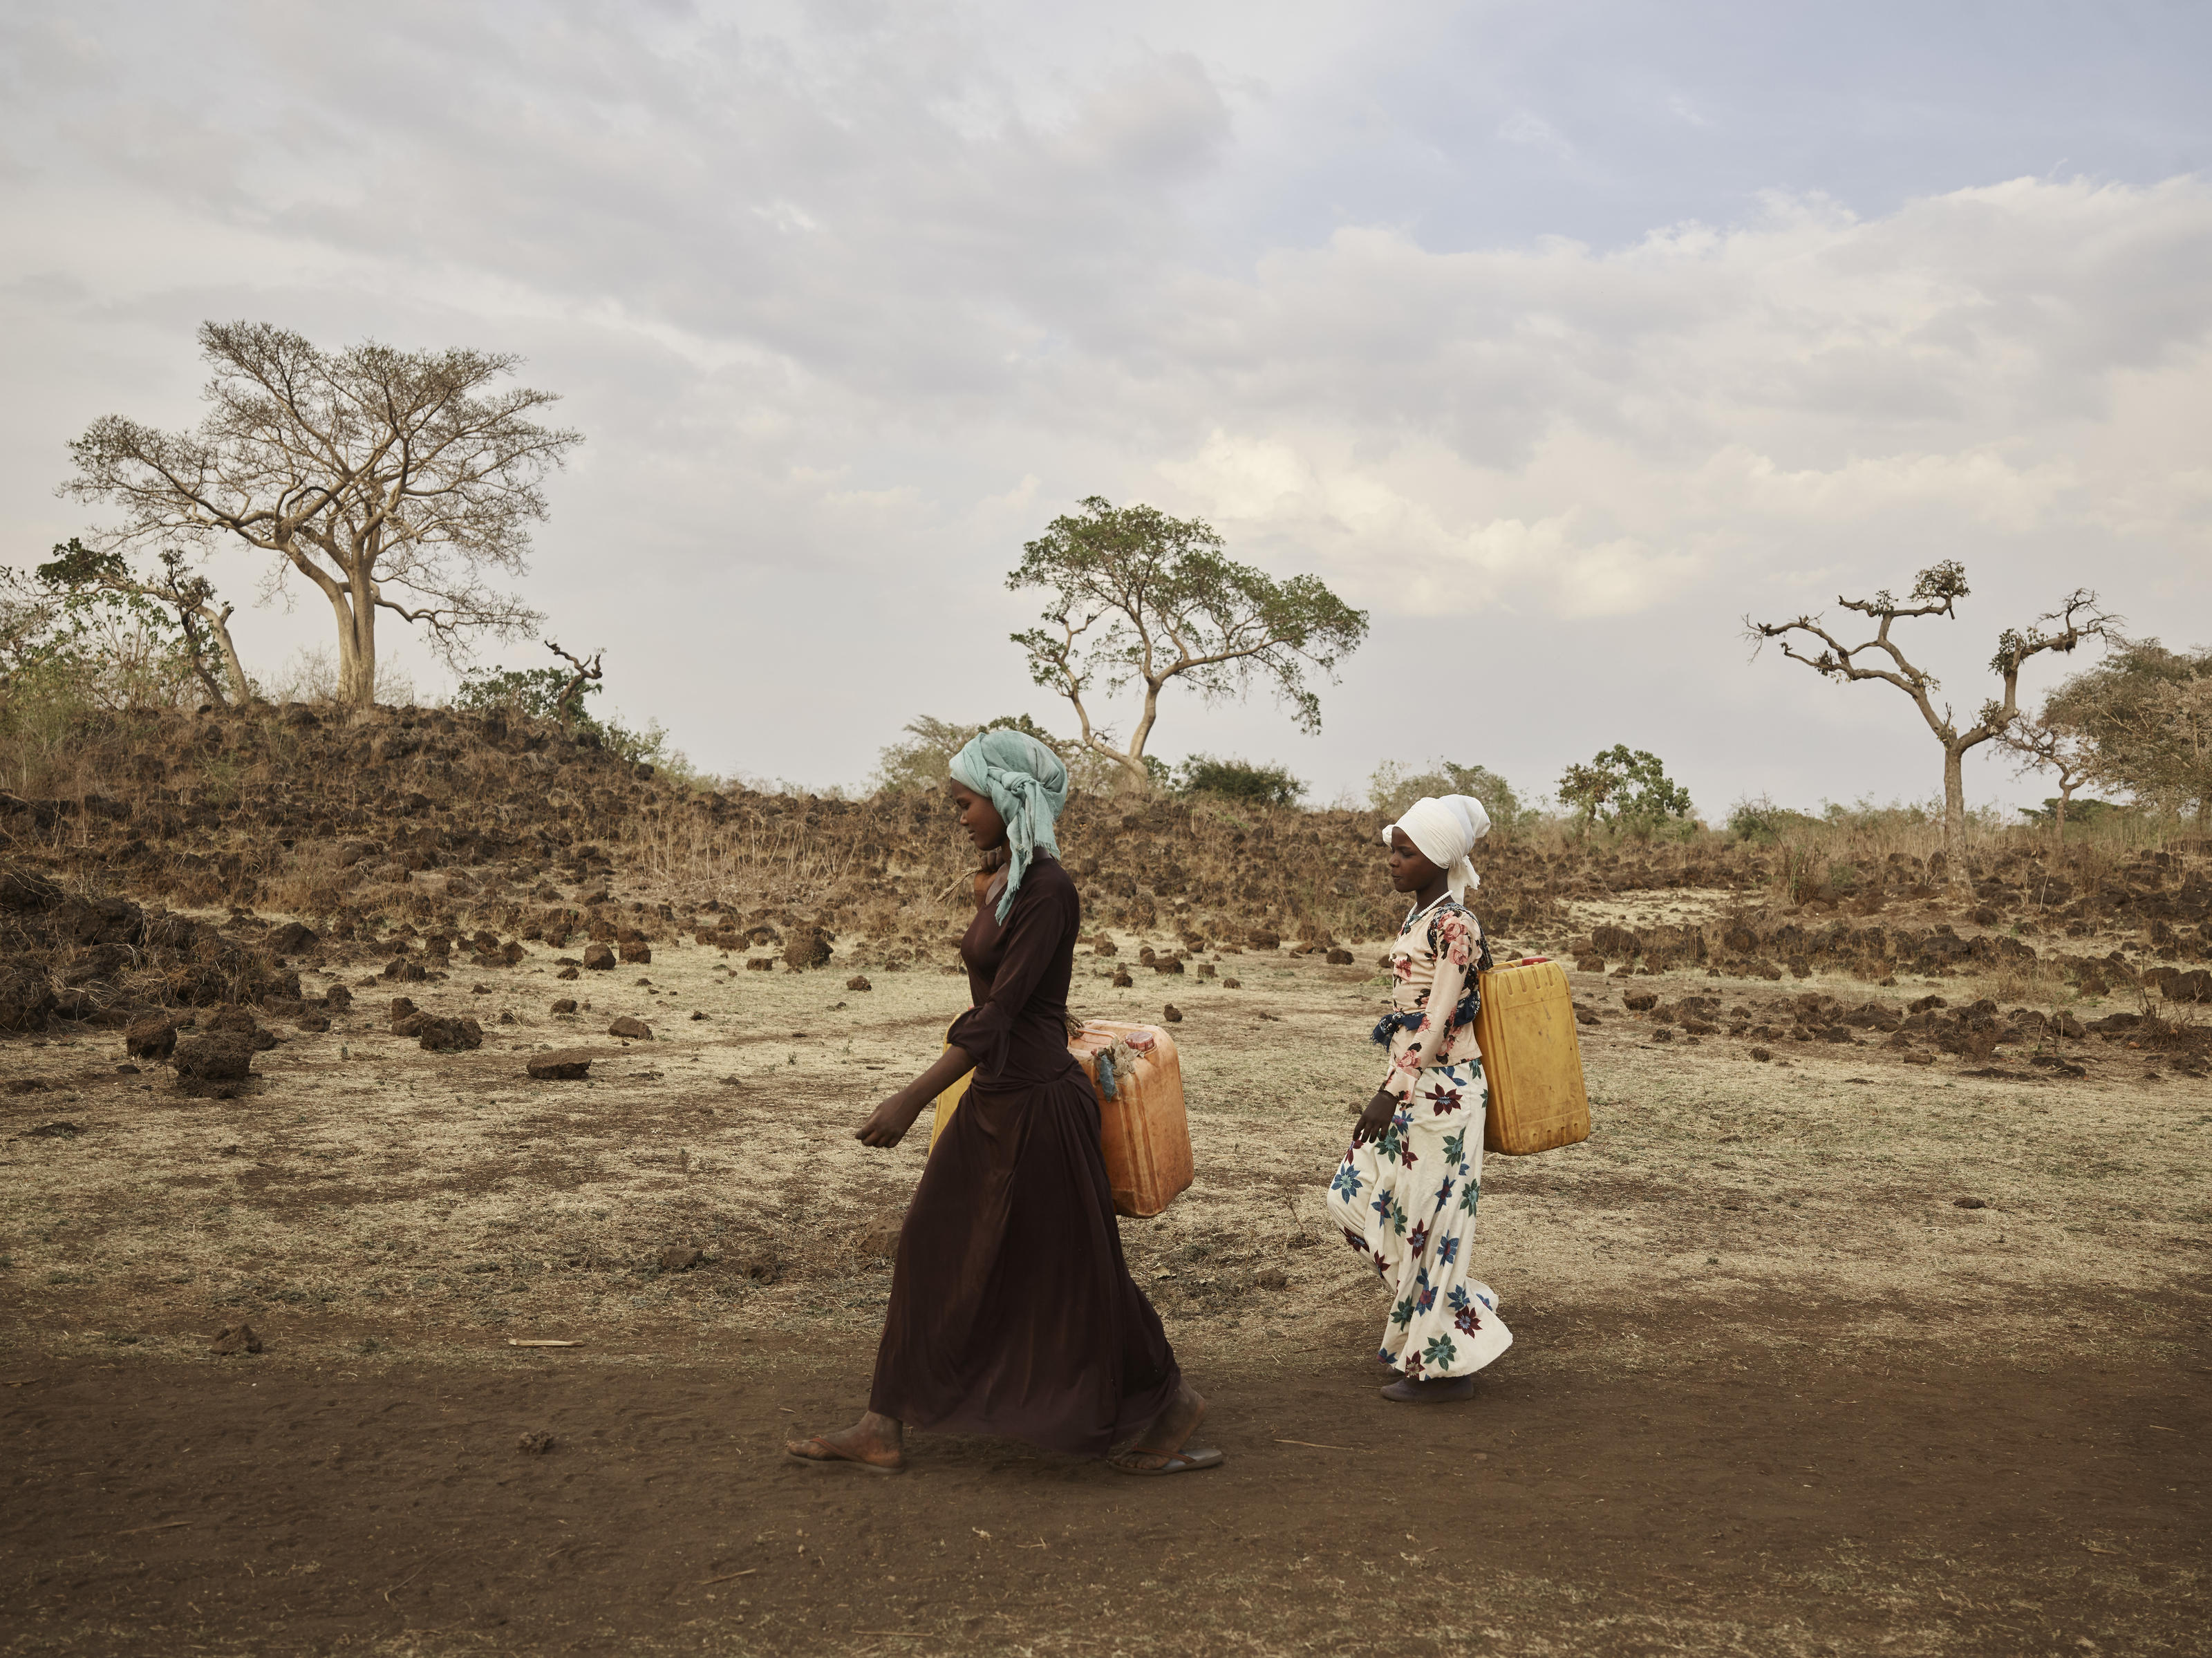 Kadija and her sister Ansha carry water from the River Lah in Ethiopia.